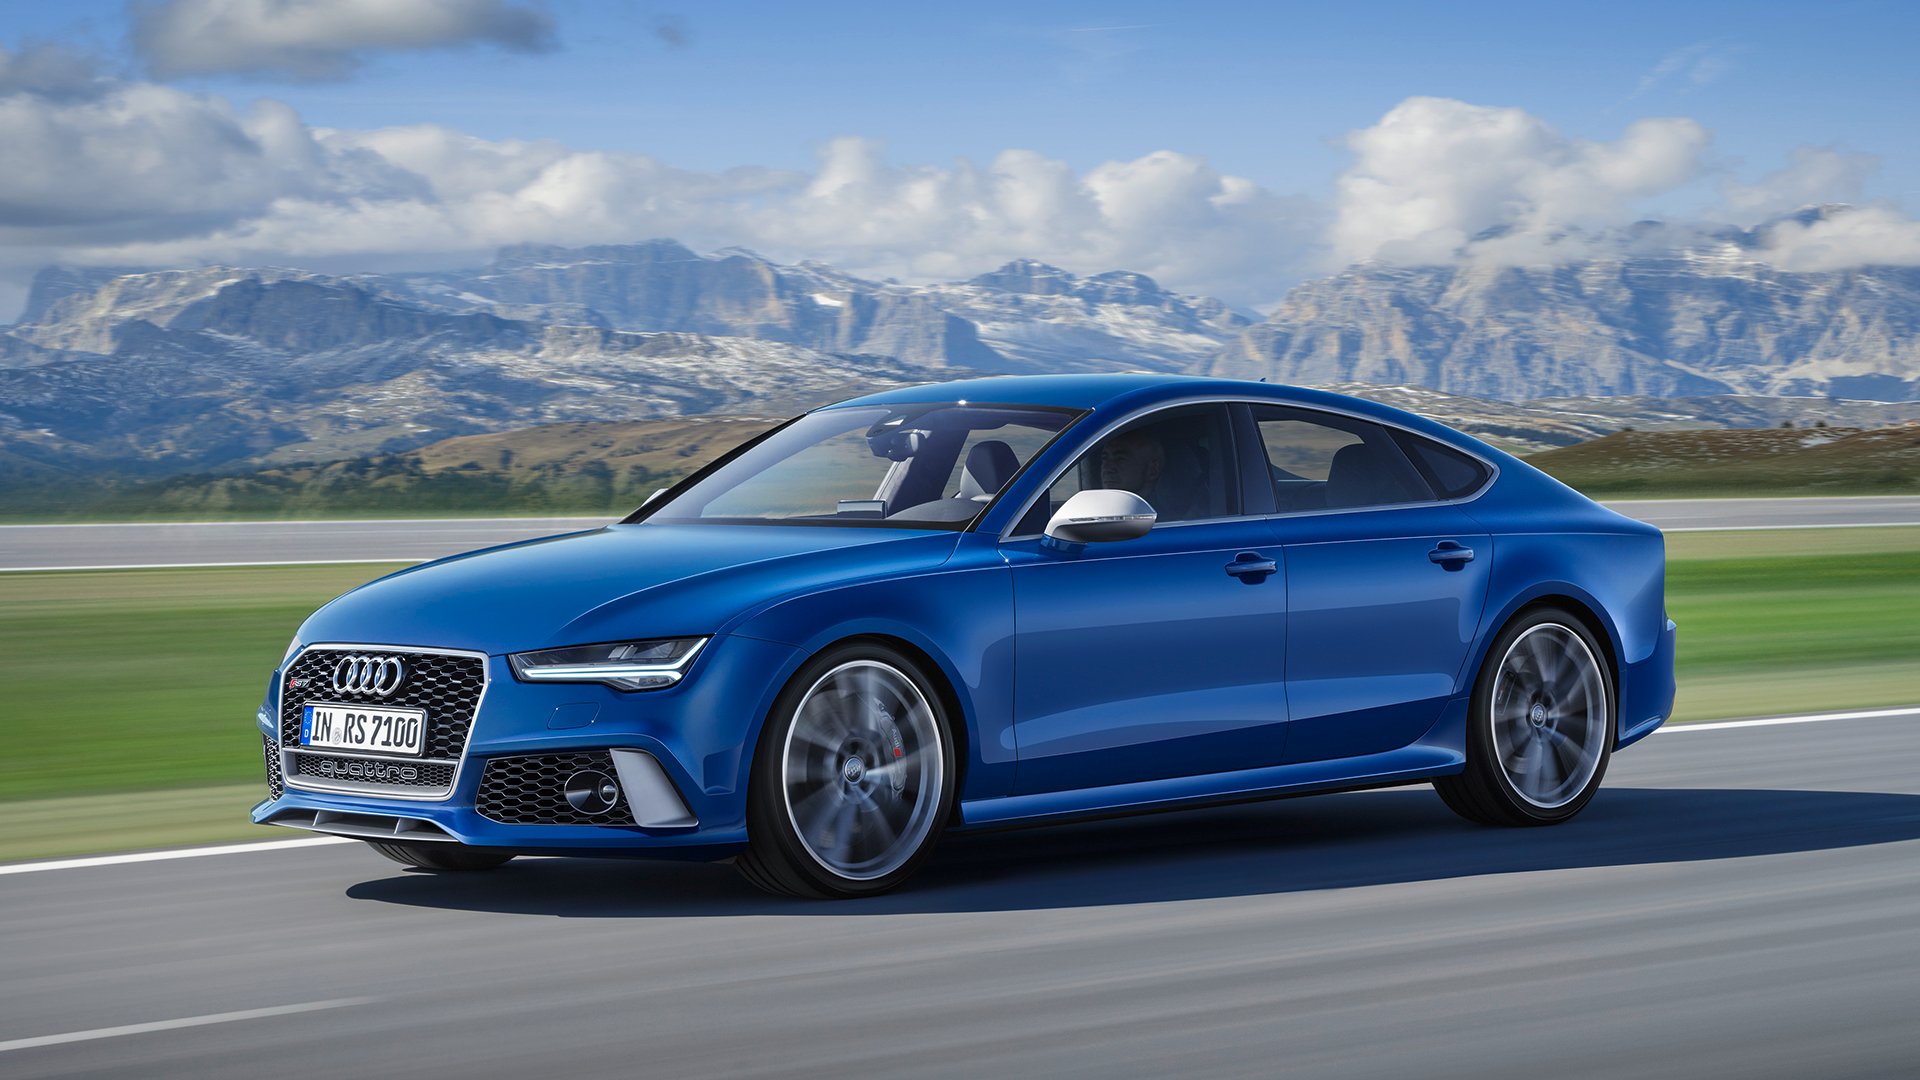 https://s1.cdn.autoevolution.com/images/news/audi-sport-brand-to-expand-with-eight-new-models-by-2019-116165_1.jpg